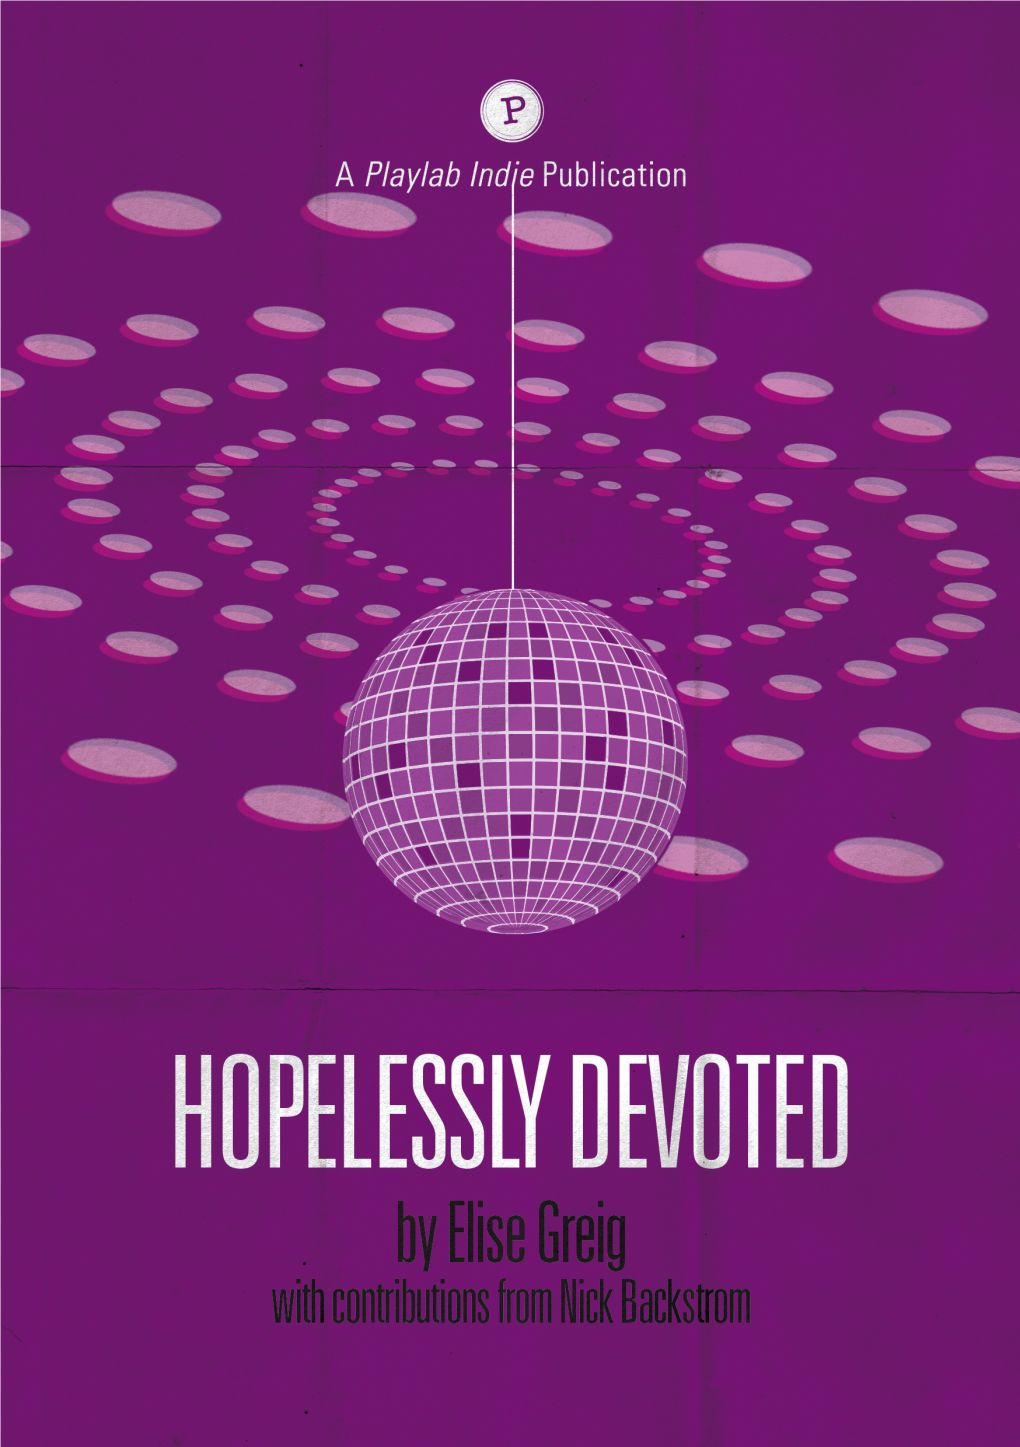 Hopelessly Devoted by Elise Greig with Contributions from Nick Backstrom